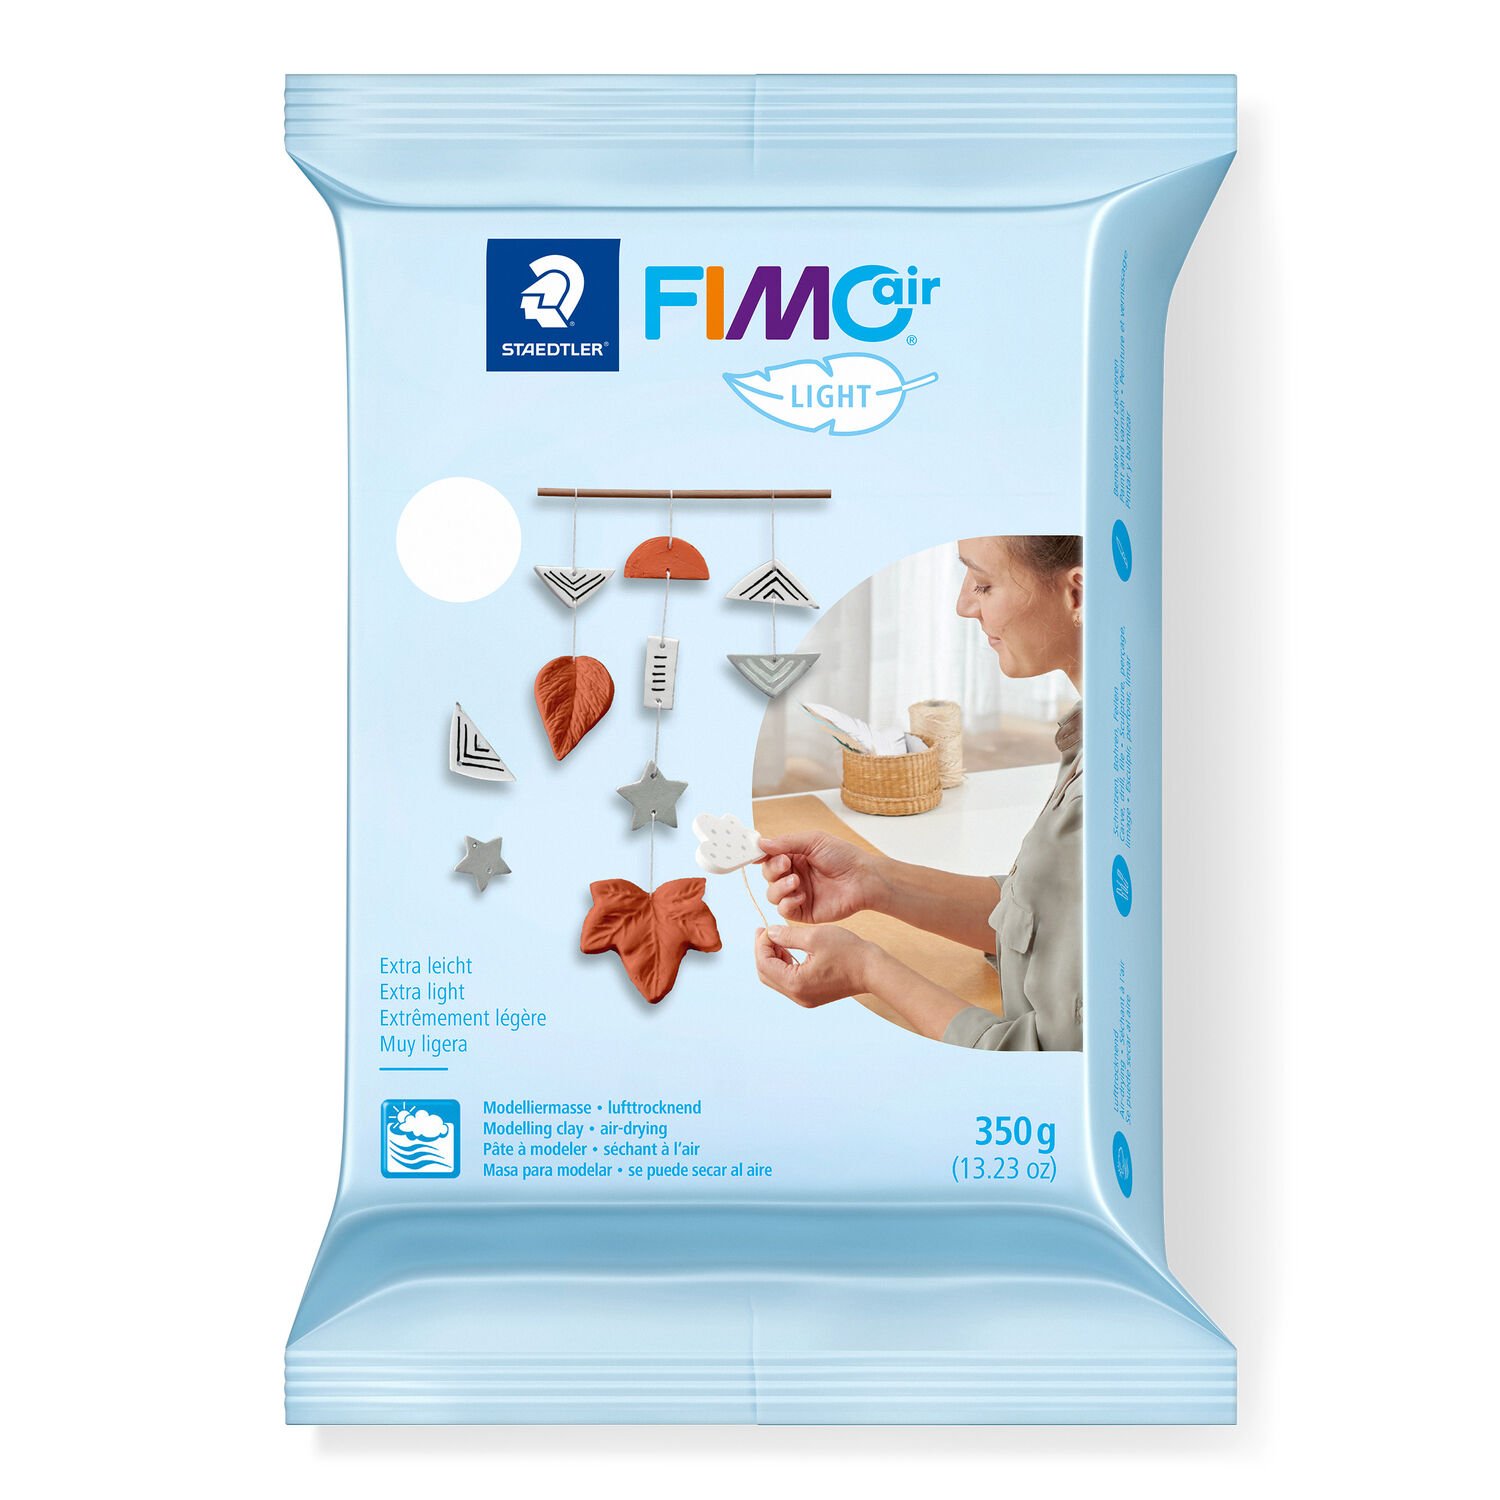 FIMO®air light 8130 - Air-drying modelling clay